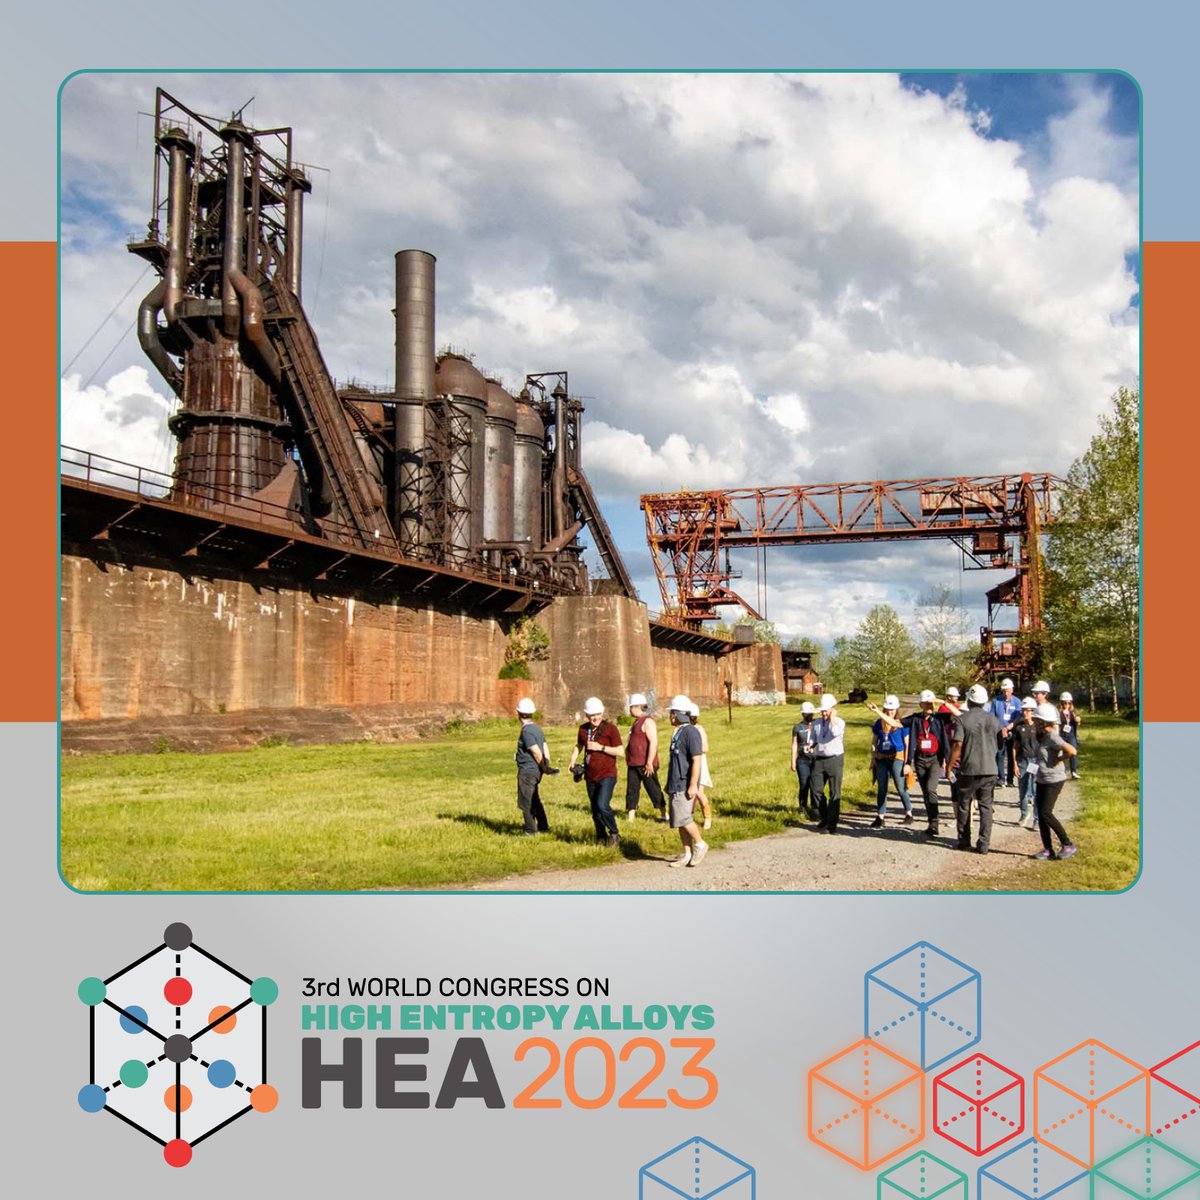 #HEA2023 will feature an optional tour of the Carrie Blast Furnaces. Don’t miss your chance to participate in this tour and this exciting event. Register today and save! tms.org/HEA2023 
Photo courtesy of Rivers of Steel